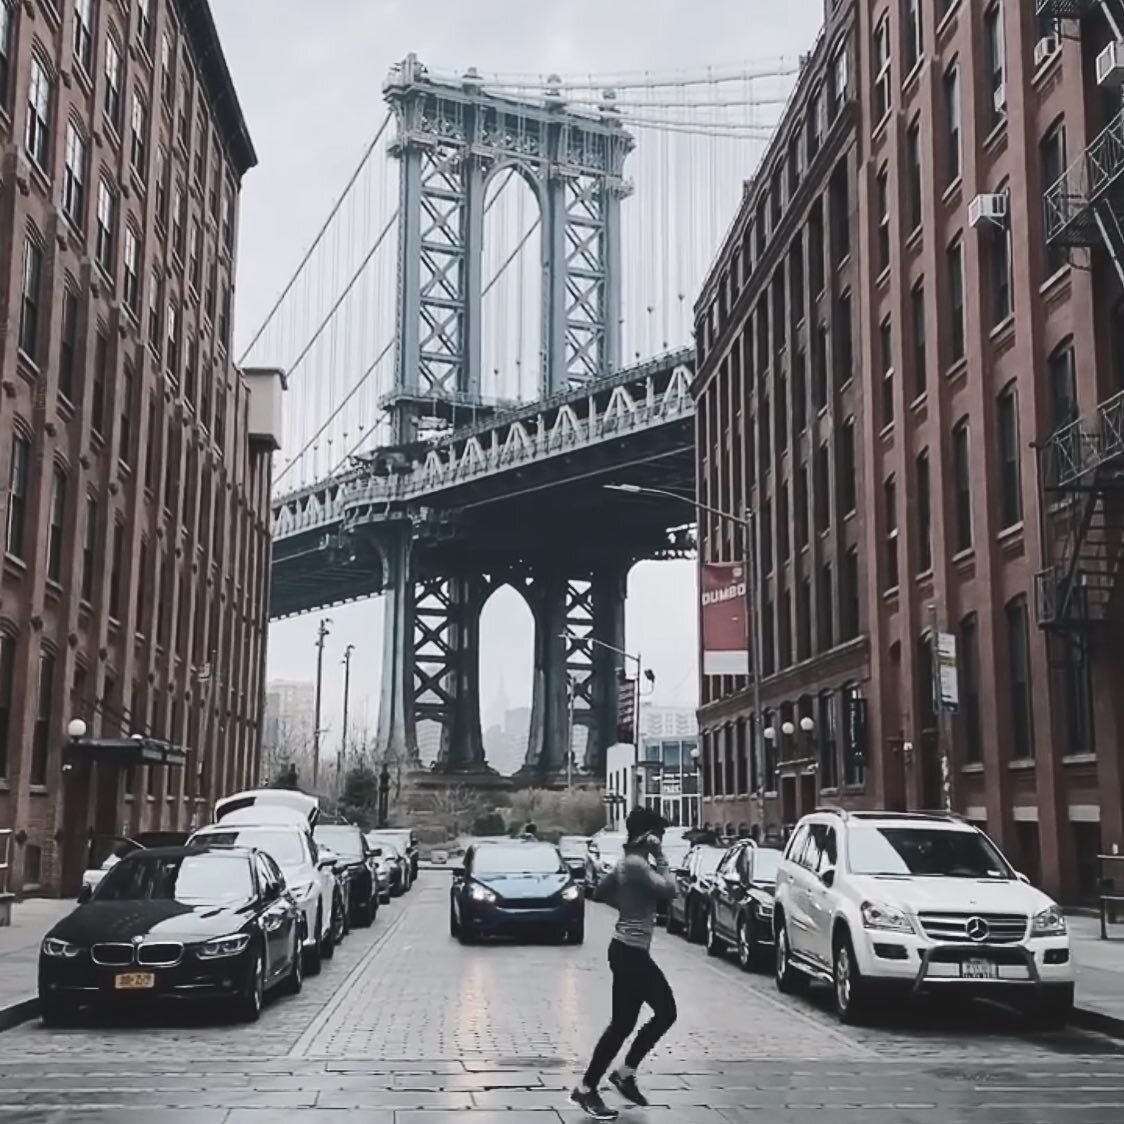 Even though New York&rsquo;s streets are almost empty - in a way - we are more connected than we have been in a long time. Let that sink in...fear breeds paralysis - acknowledged fear in combination with (virtually) being there for one another, howev